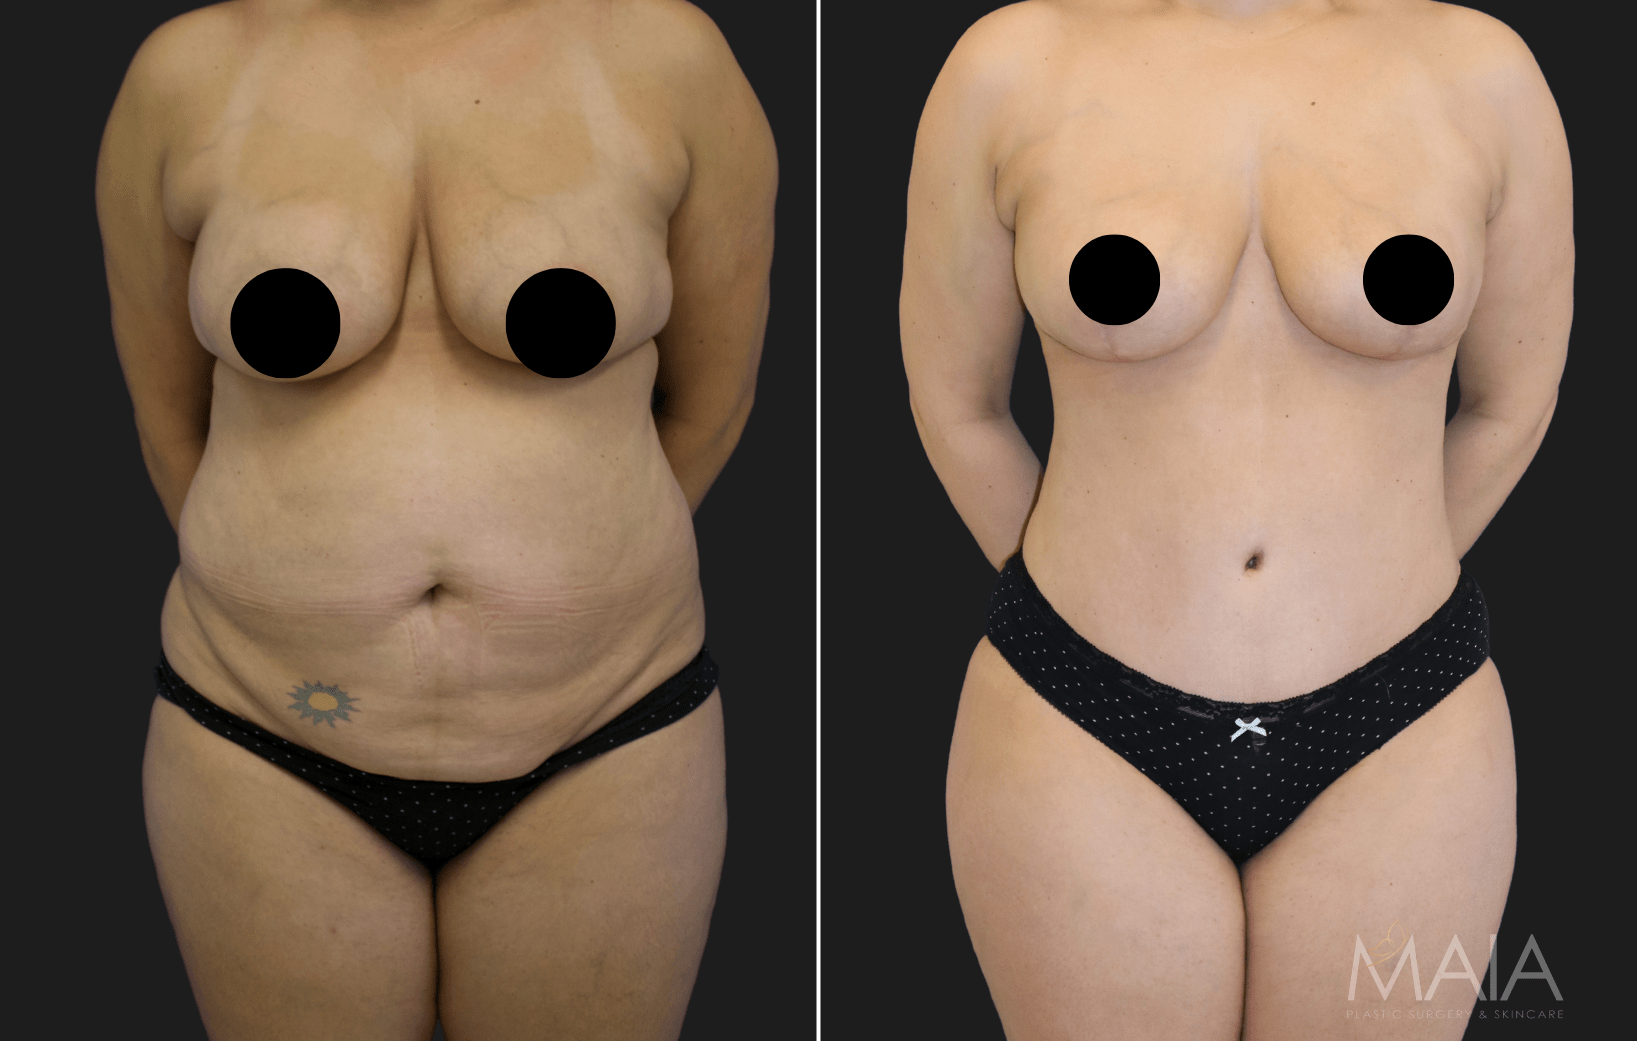 How Should I Sleep After a Tummy Tuck Skin Tightening Surgery?